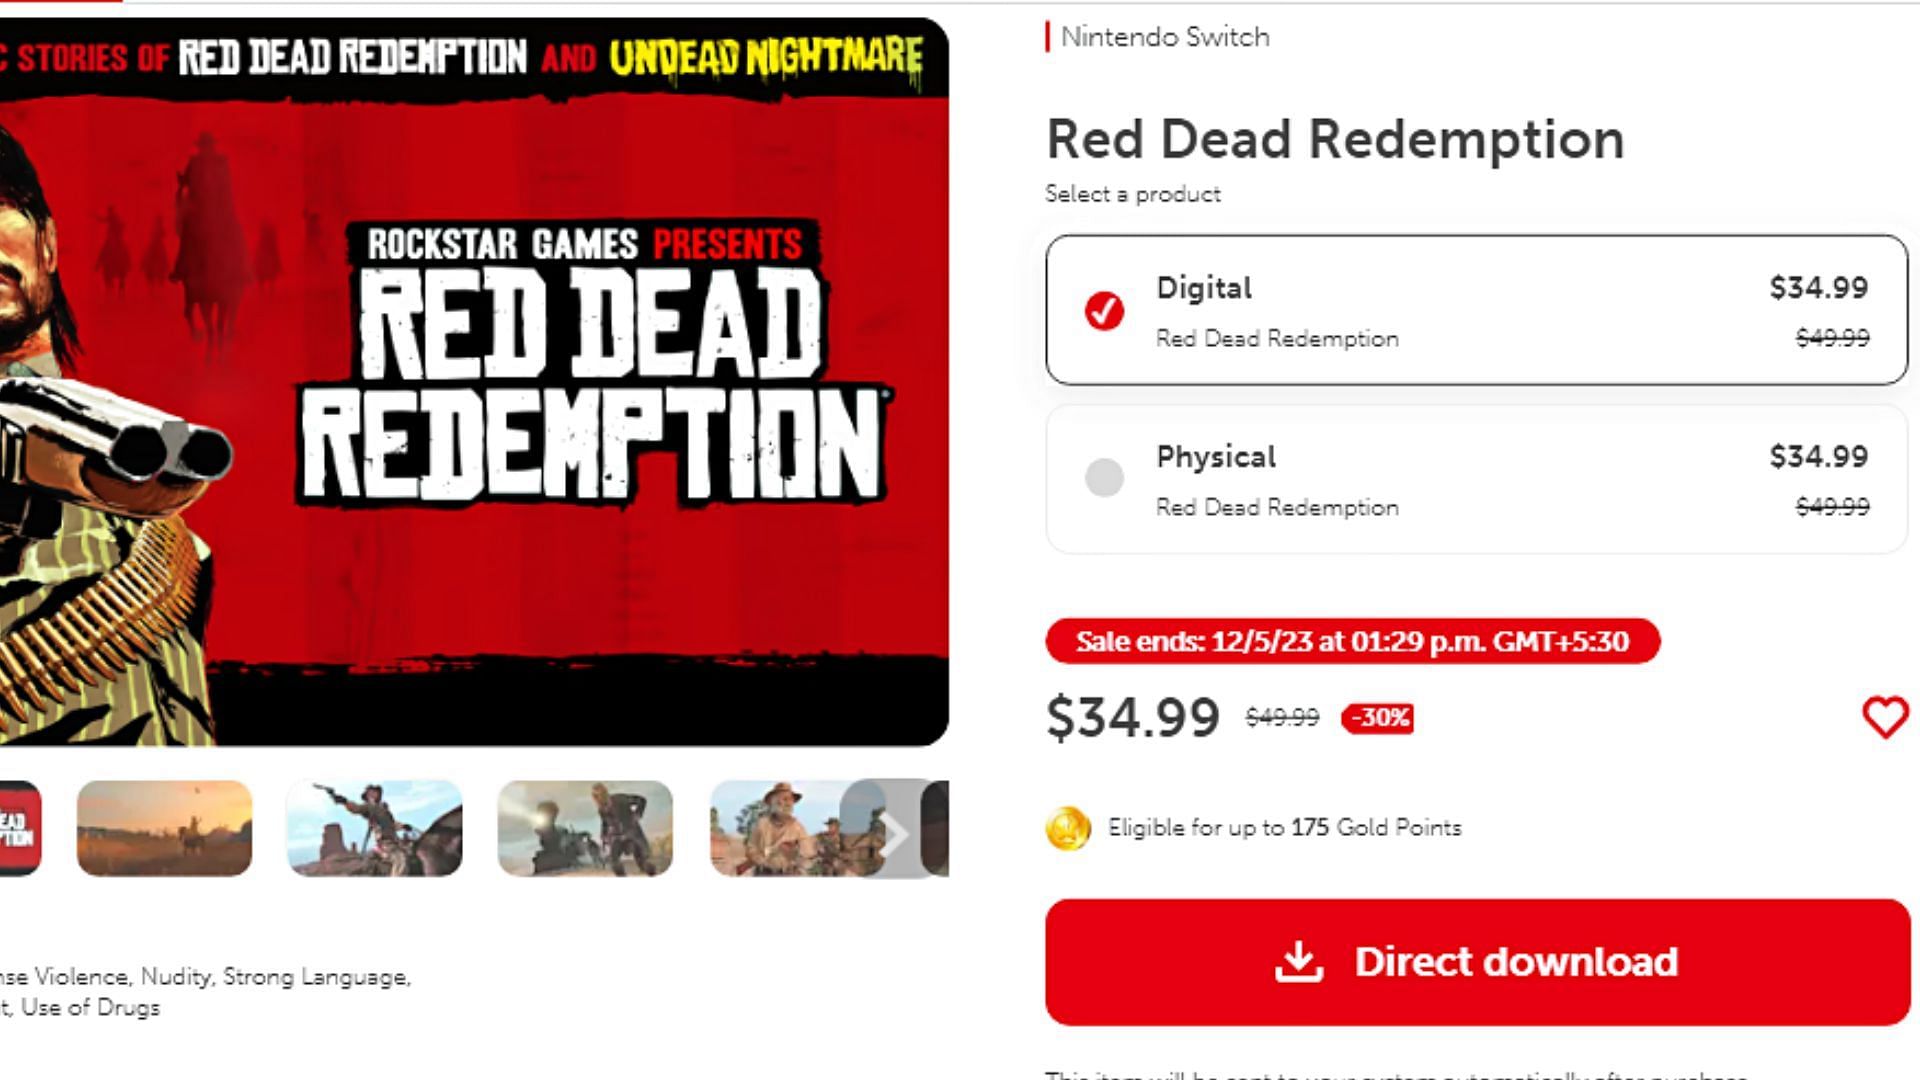 Red Dead Redemption&#039;s page on the Nintendo store (Image via nintendo.com)